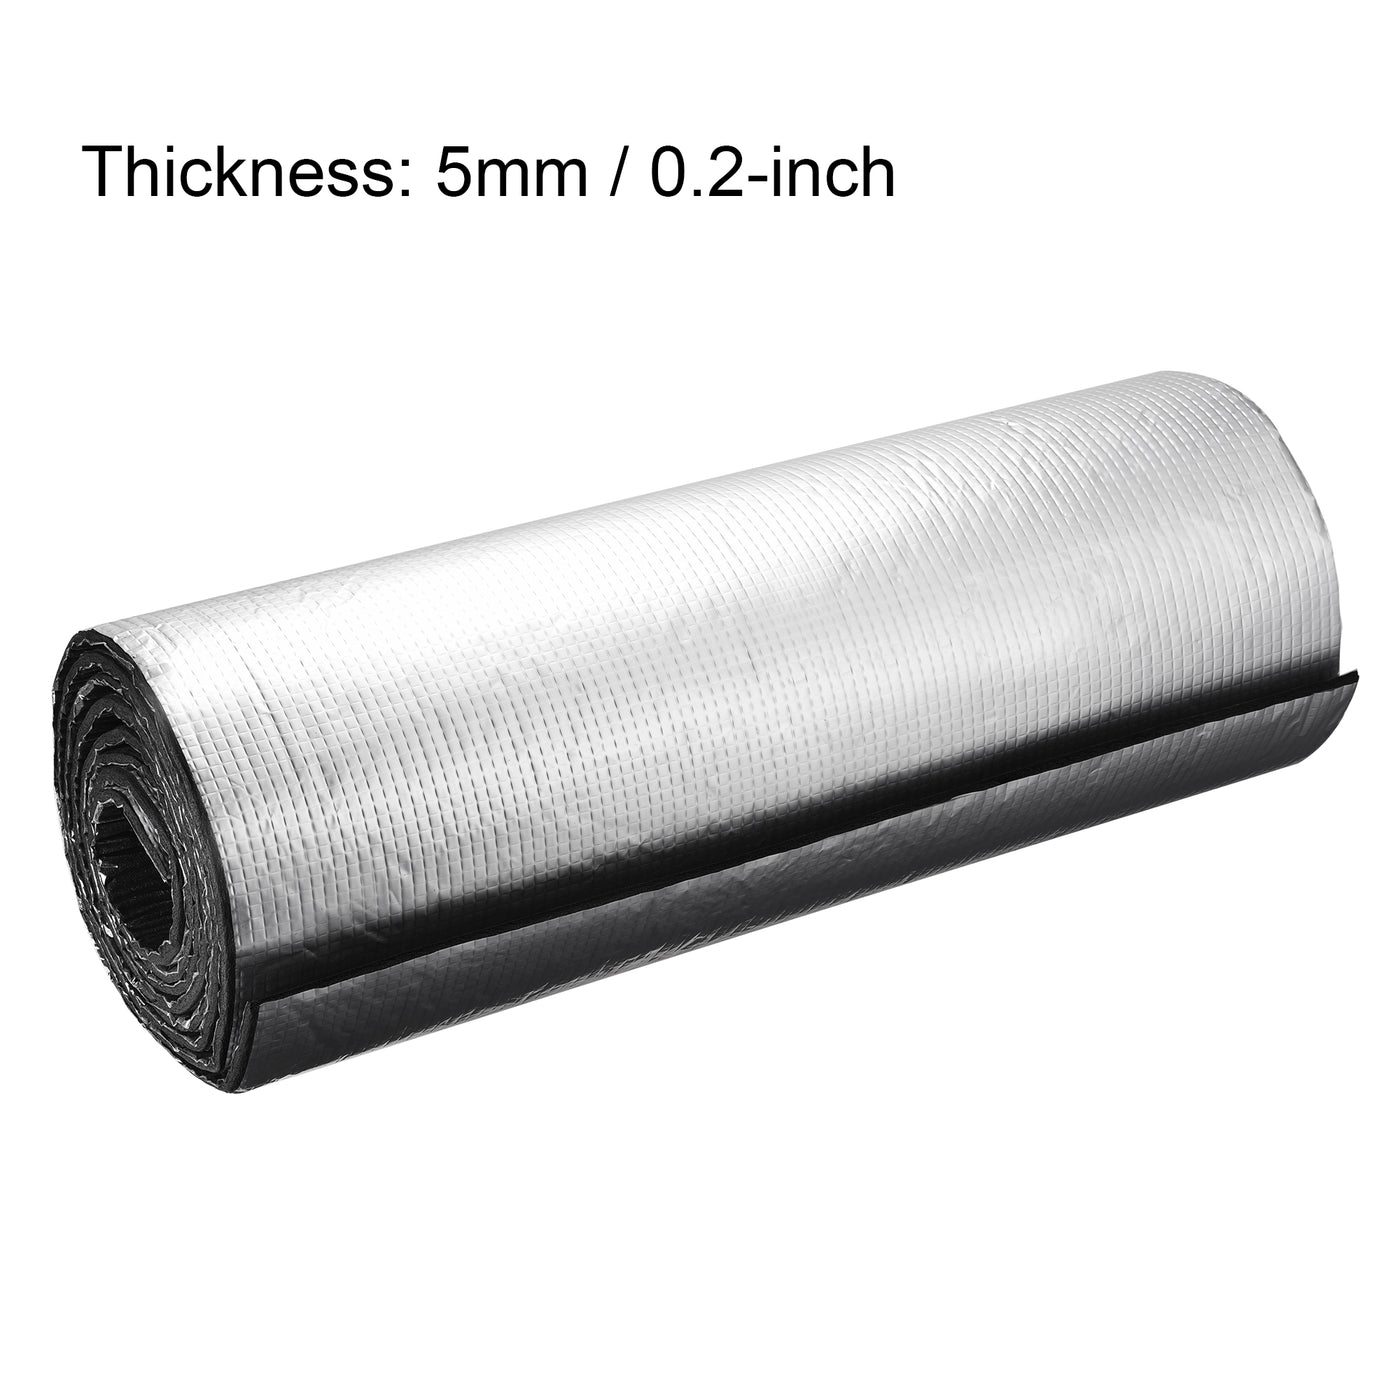 uxcell Uxcell Insulation Sheet Self-Adhesive Embossed Aluminum Foil Waterproof Heat Resistant Thermal Barrier for Roof Wall Duct Pipe Rubber Foam